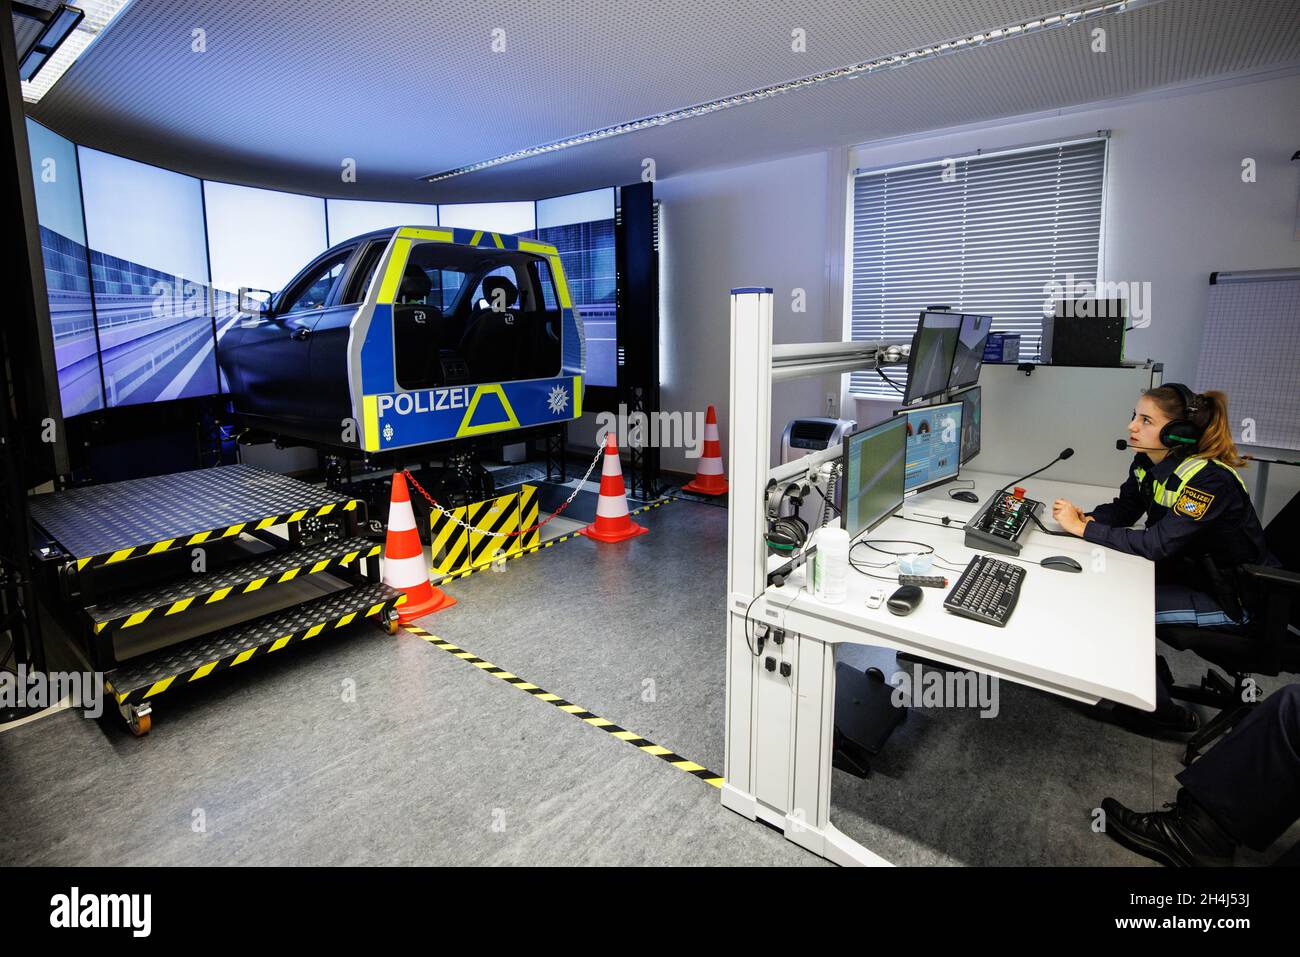 Police Simulator High Resolution Stock Photography and Images - Alamy